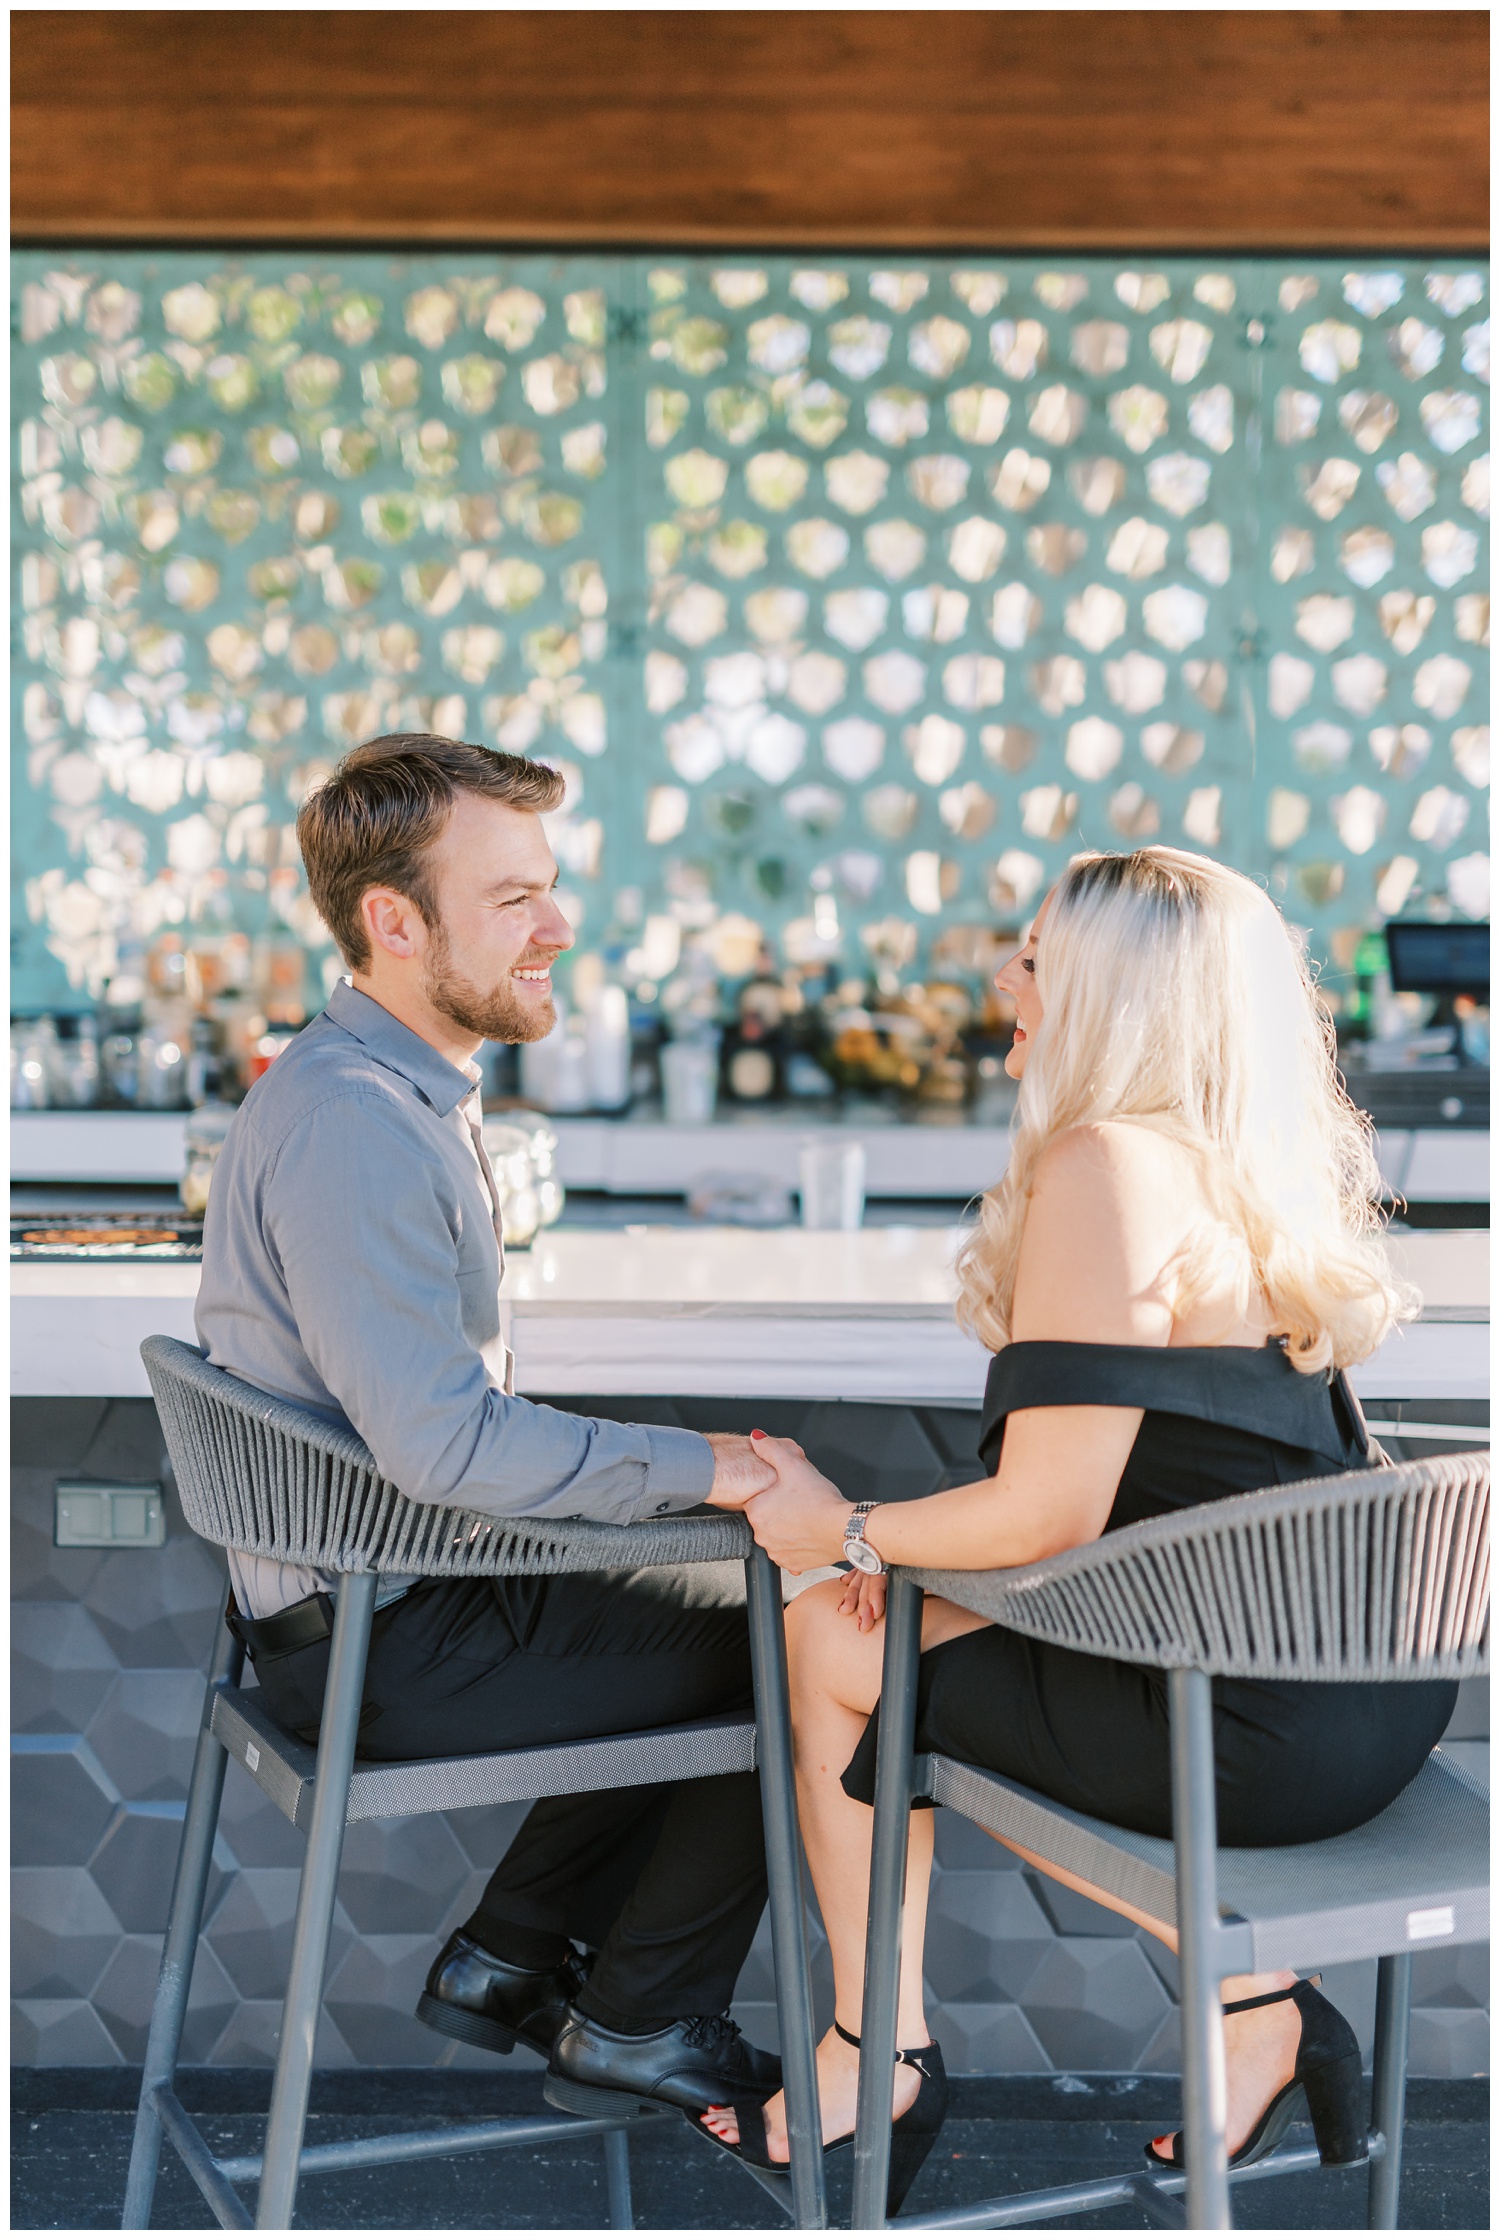 Downtown tampa bar engagement session